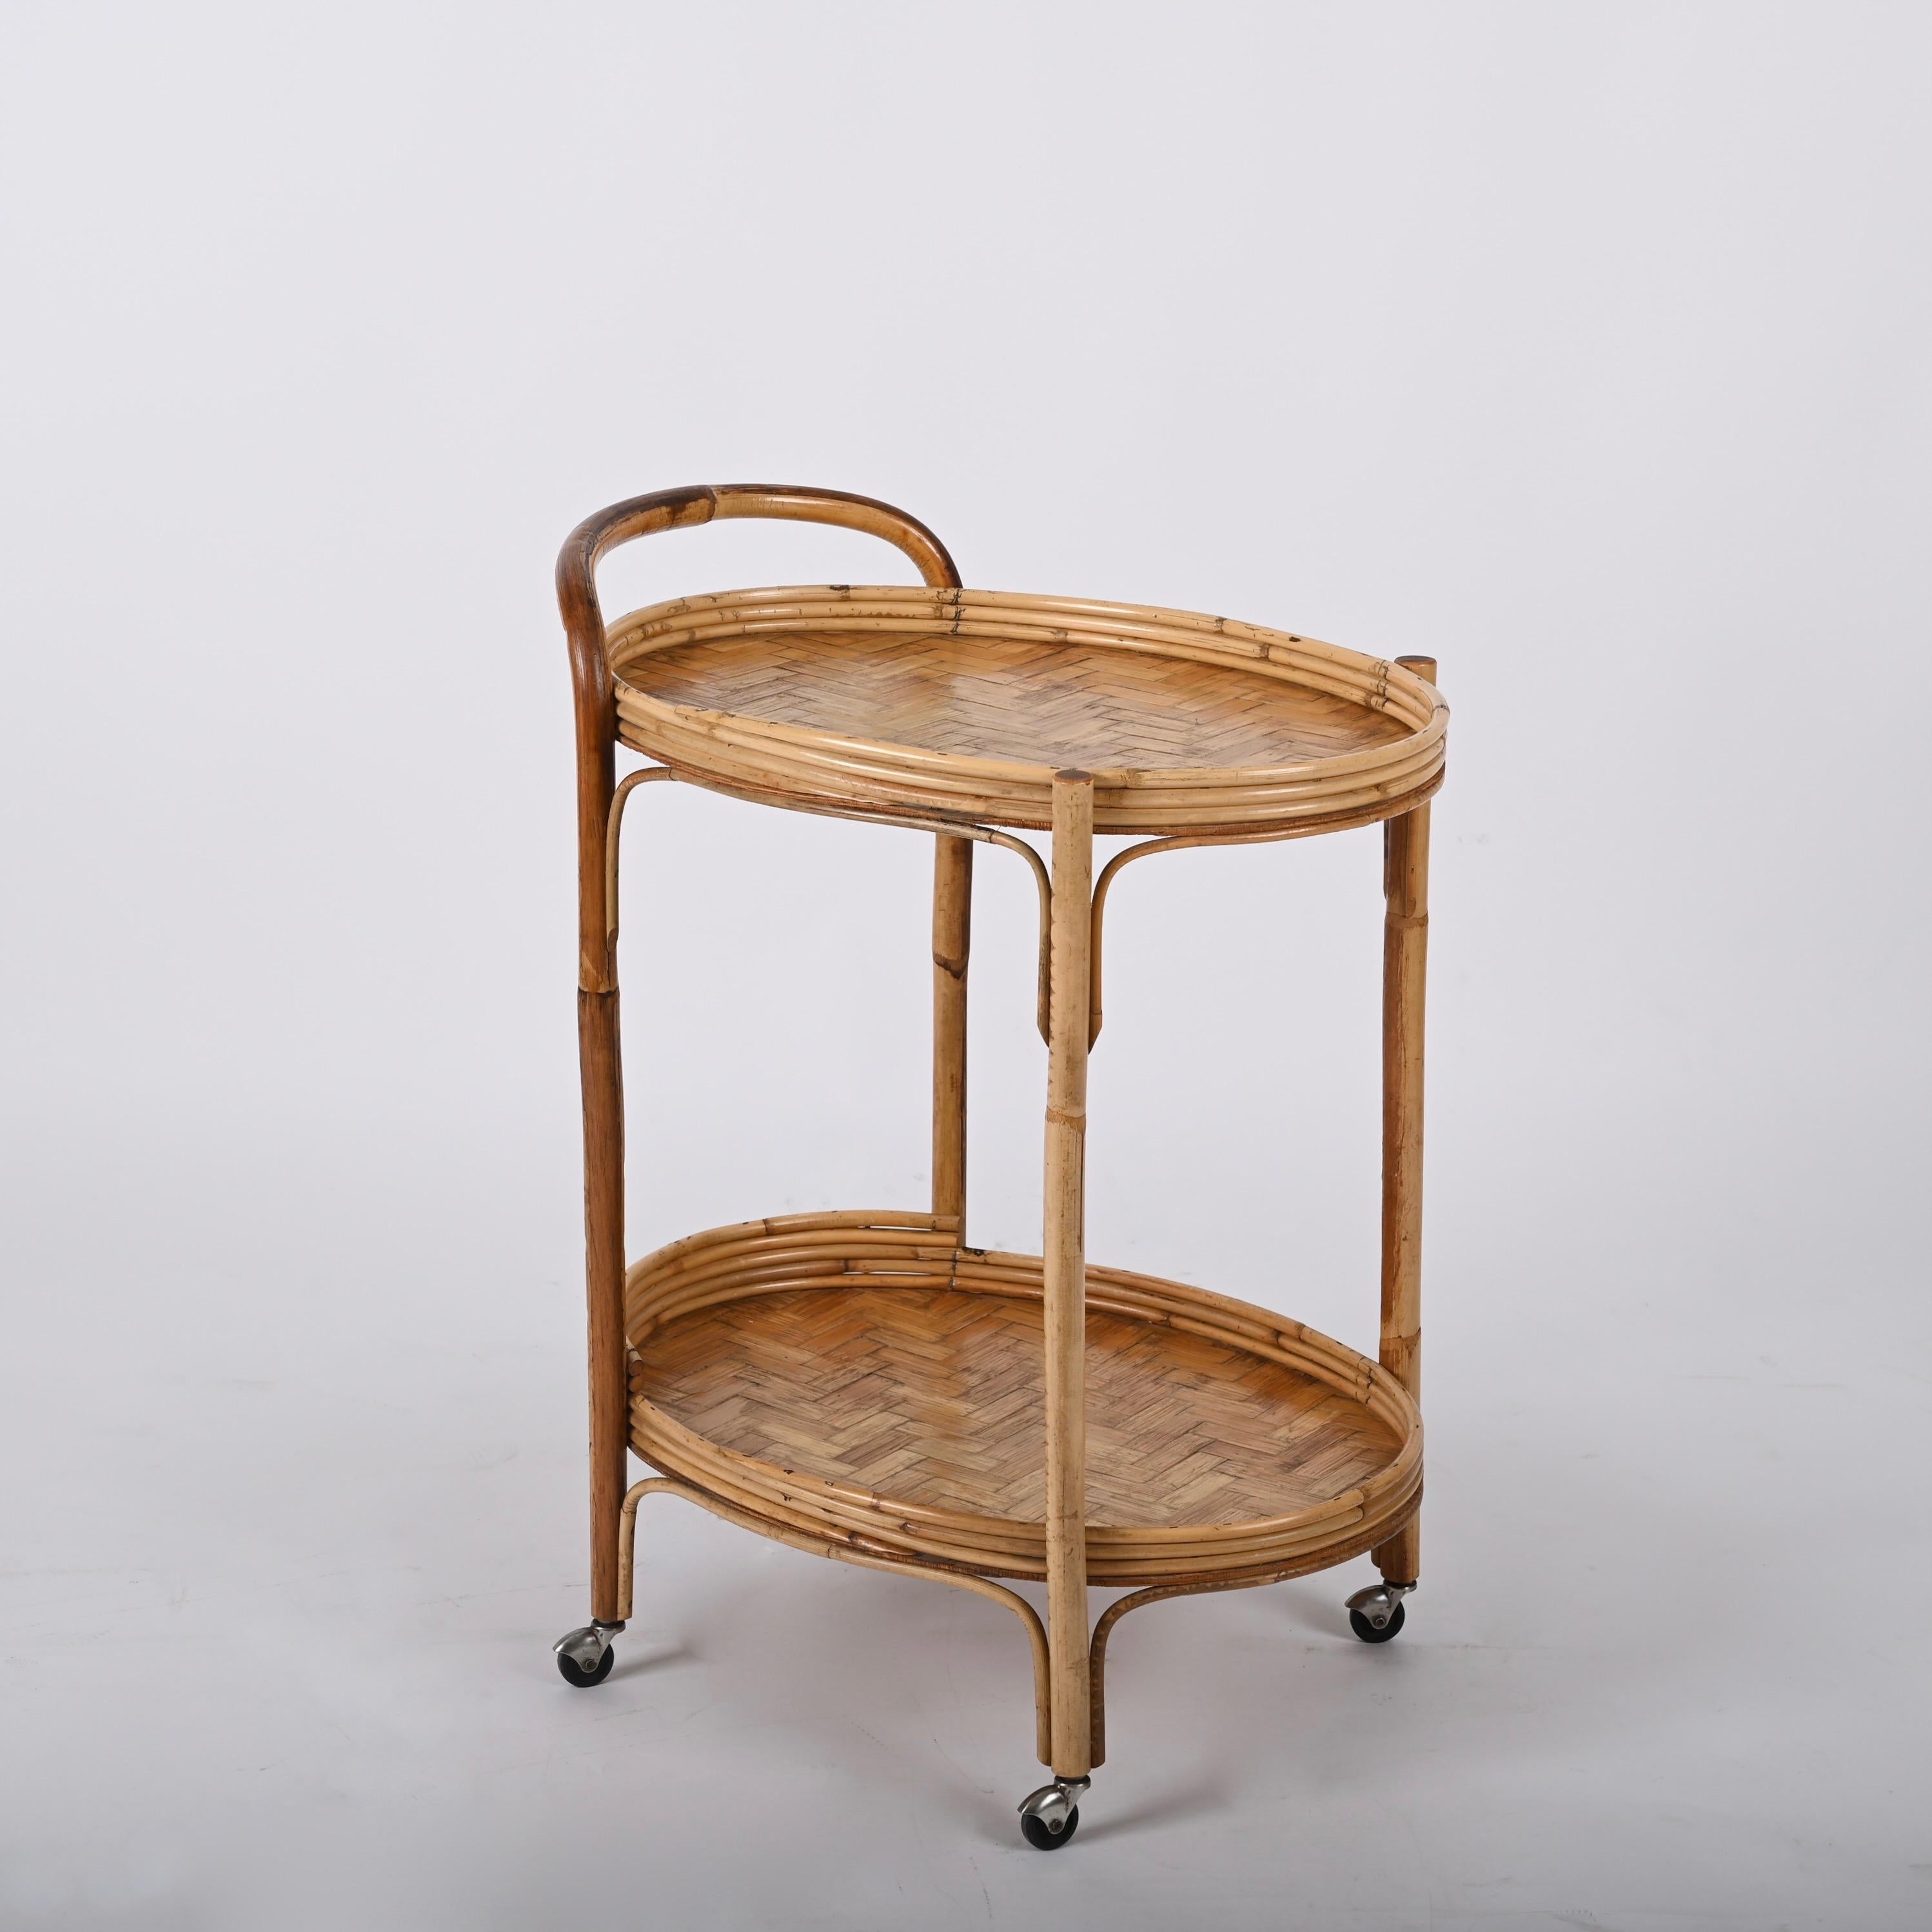 Midcentury rattan and bamboo cane oval bar cart with four wheels. This fantastic piece was designed in Italy during the 1960s.

A wonderful item in fantastic vintage condition, with four small wheels and two oval shelves made of rattan with a bamboo